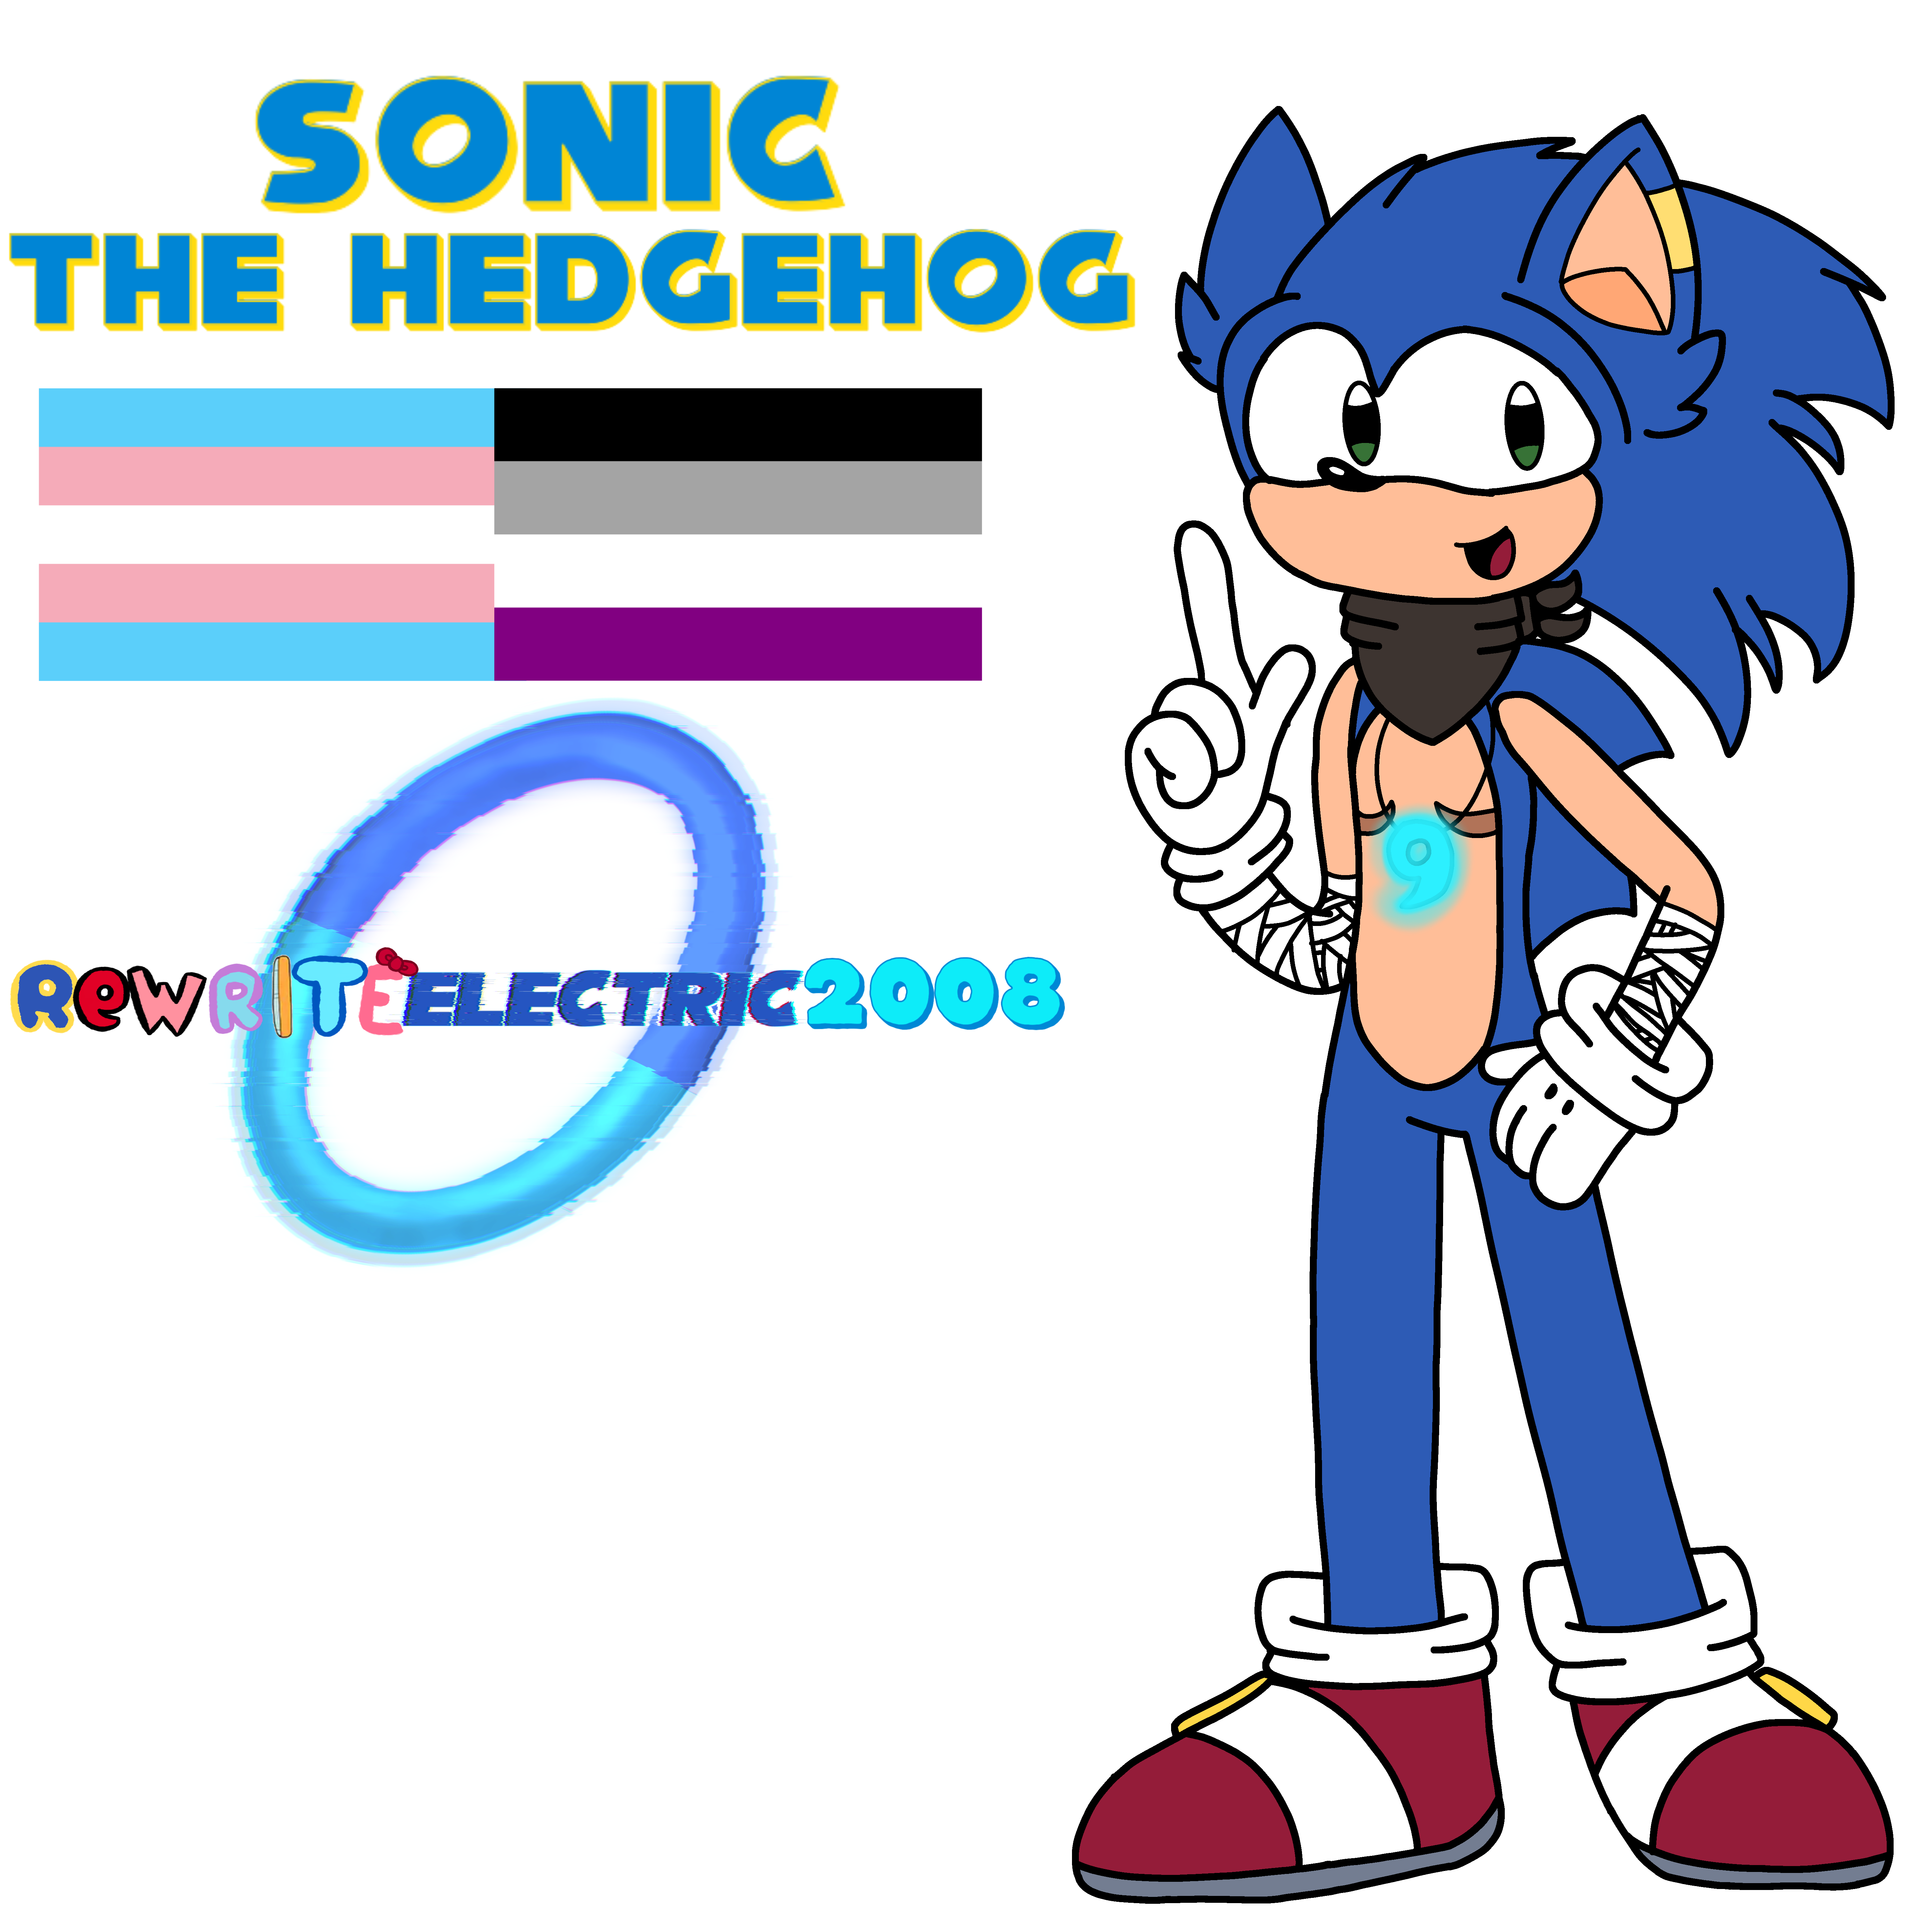 Proto arts (📌c0mms open 2/10 slots) on X: This is my headcanon for Sonic's  age  / X